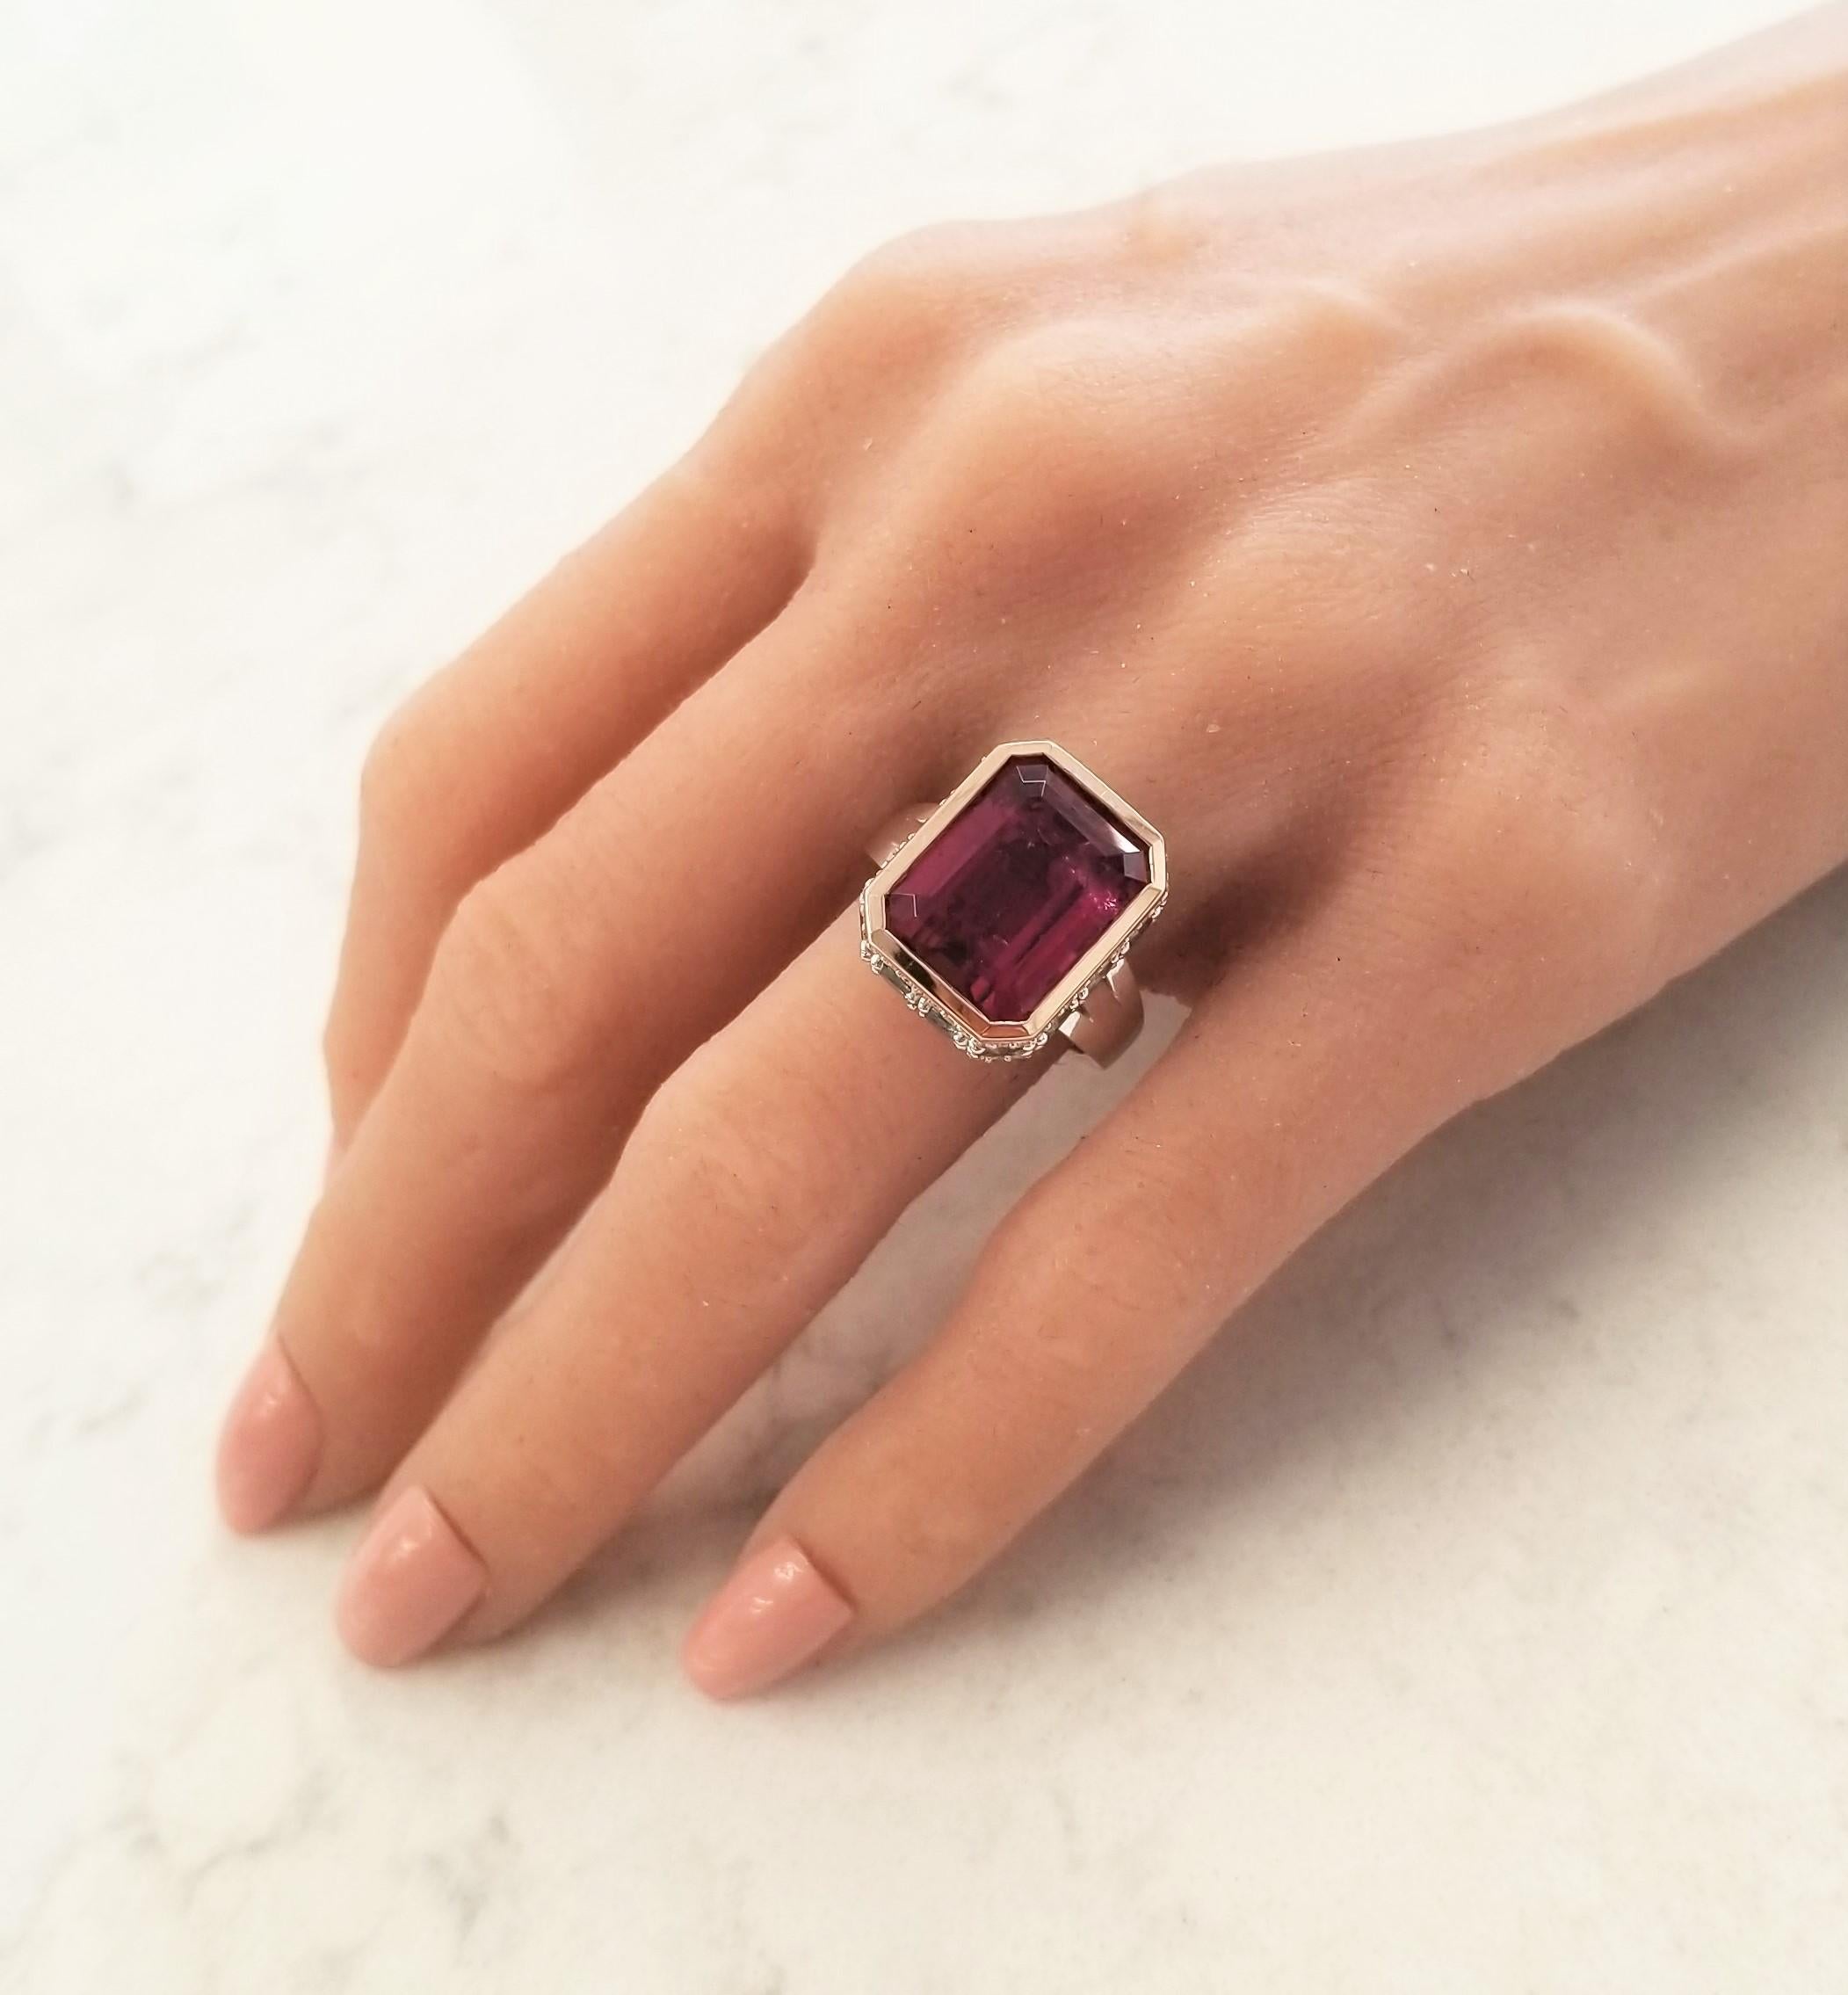 This ring raises the design bar! A 12.22 carat deep purplish-pink rubellite tourmaline is bezel set in the center in a rich rose gold and measures 15x11mm. The gem source is Brazil; its saturation is vivid; its transparency and luster are excellent.